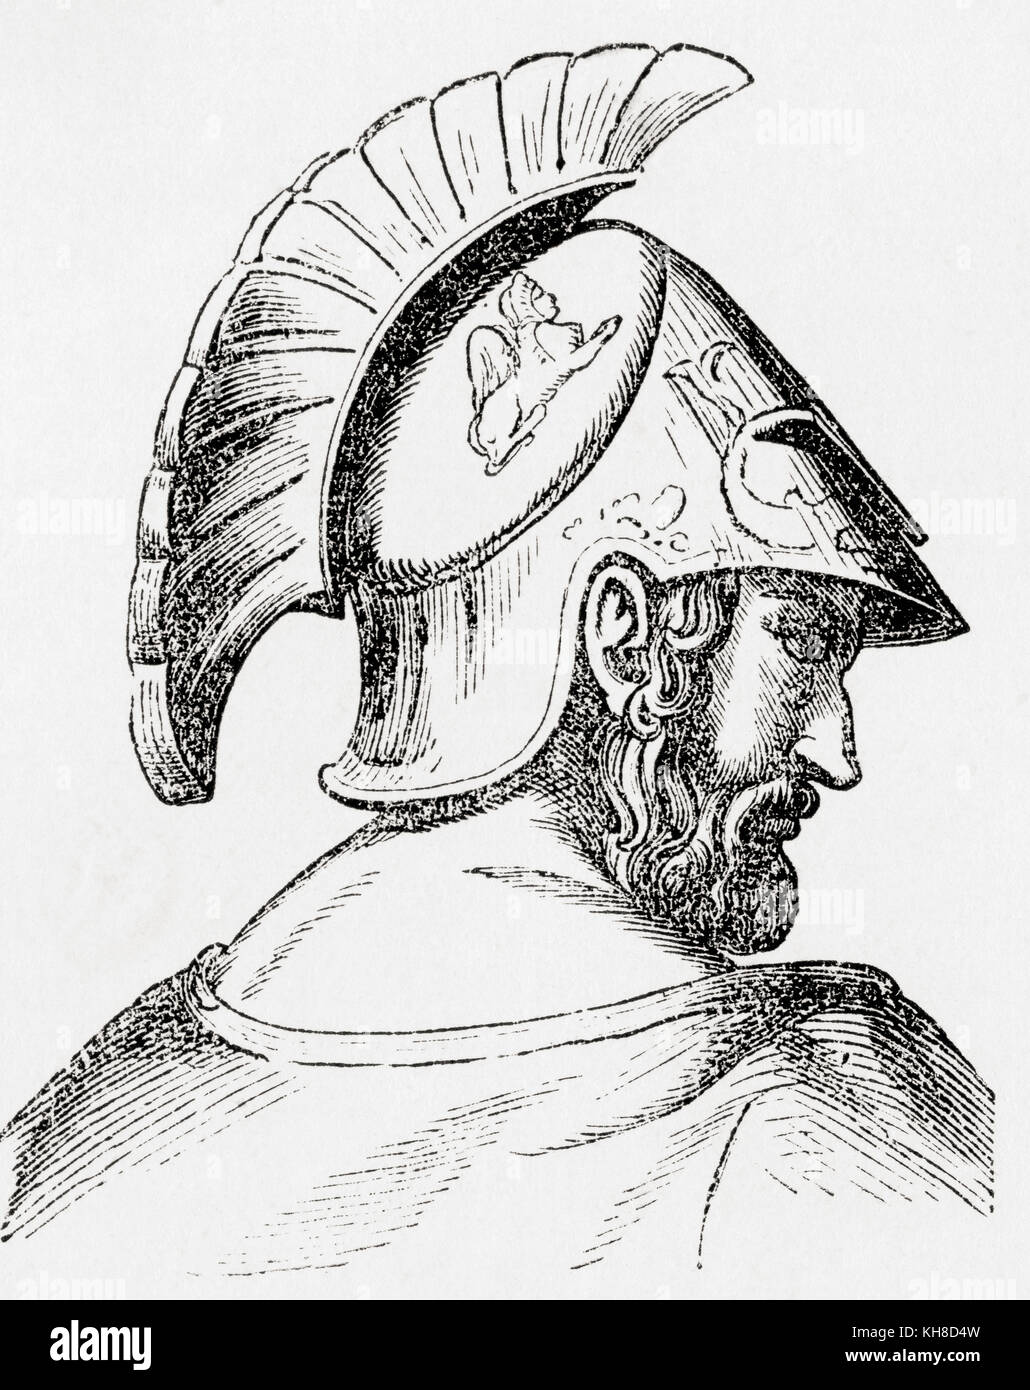 Cimon or Kimon, c. 510 – 450 BC. Athenian statesman and general in mid-5th century BC Greece.  From Ward and Lock's Illustrated History of the World, published c.1882. Stock Photo